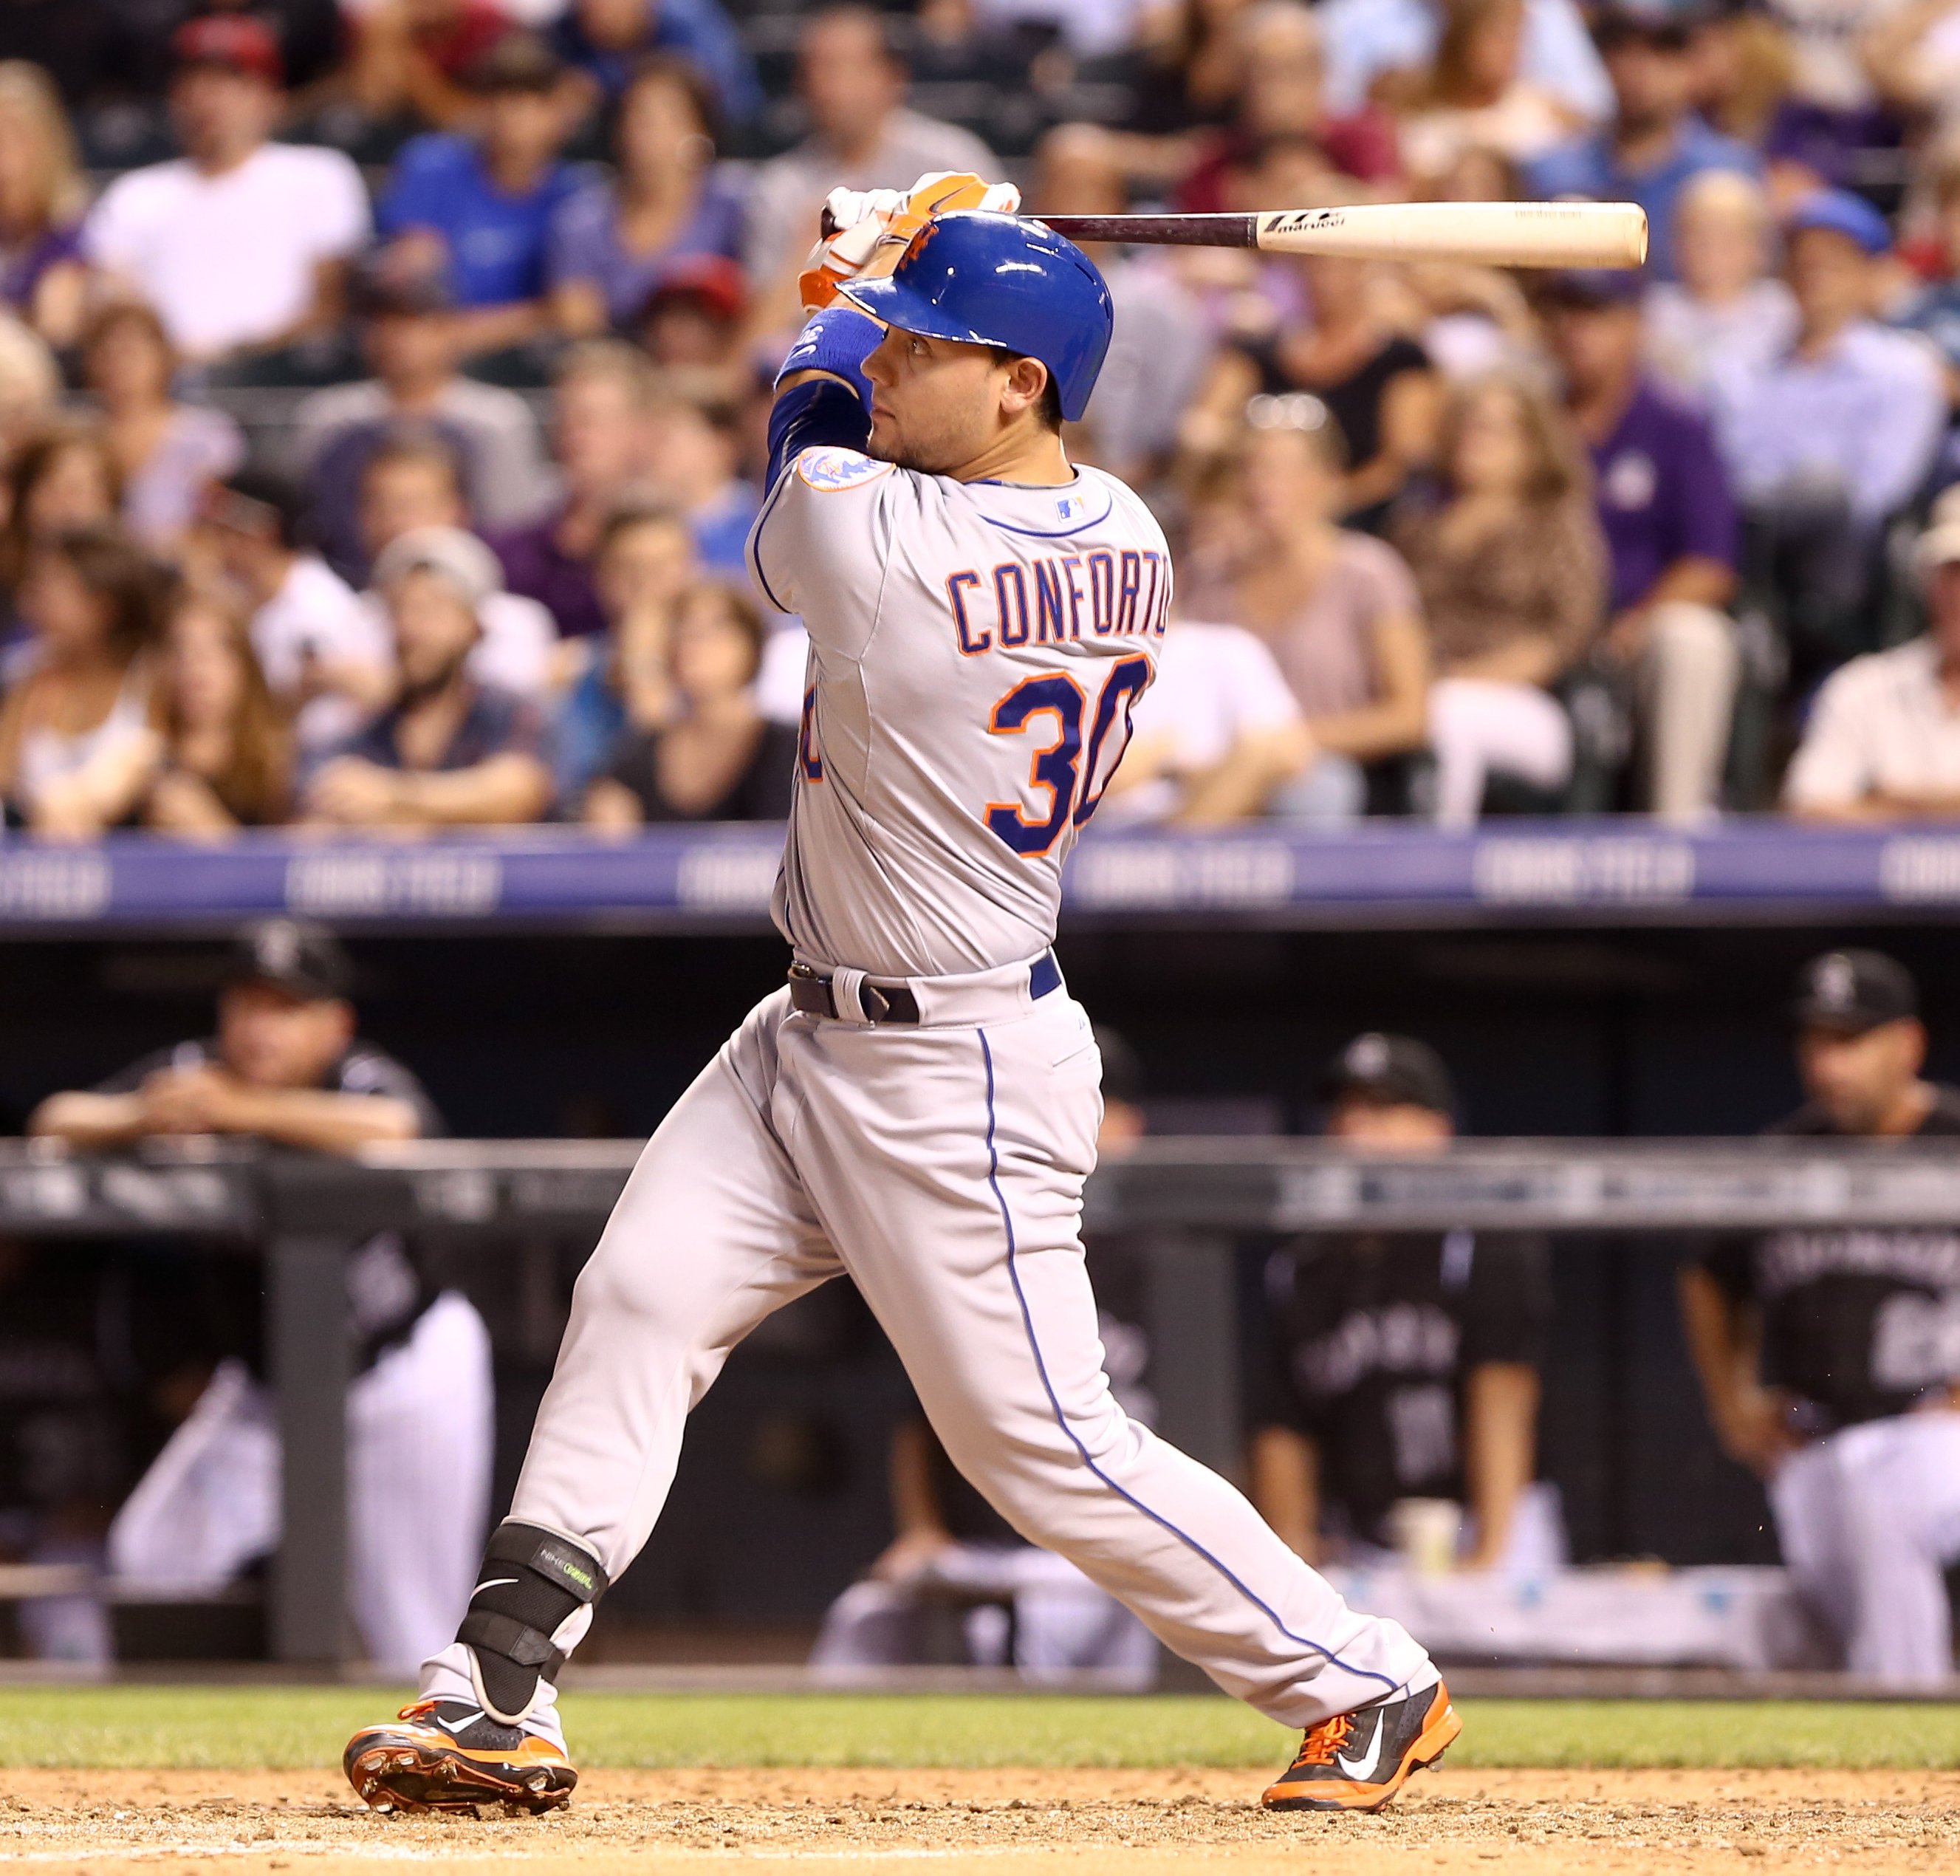 Michael Conforto swings at a pitch during a game against the Colorado Rockies at Coors Field on August 21, 2015 in Denver, Colorado | Photo: Shutterstock